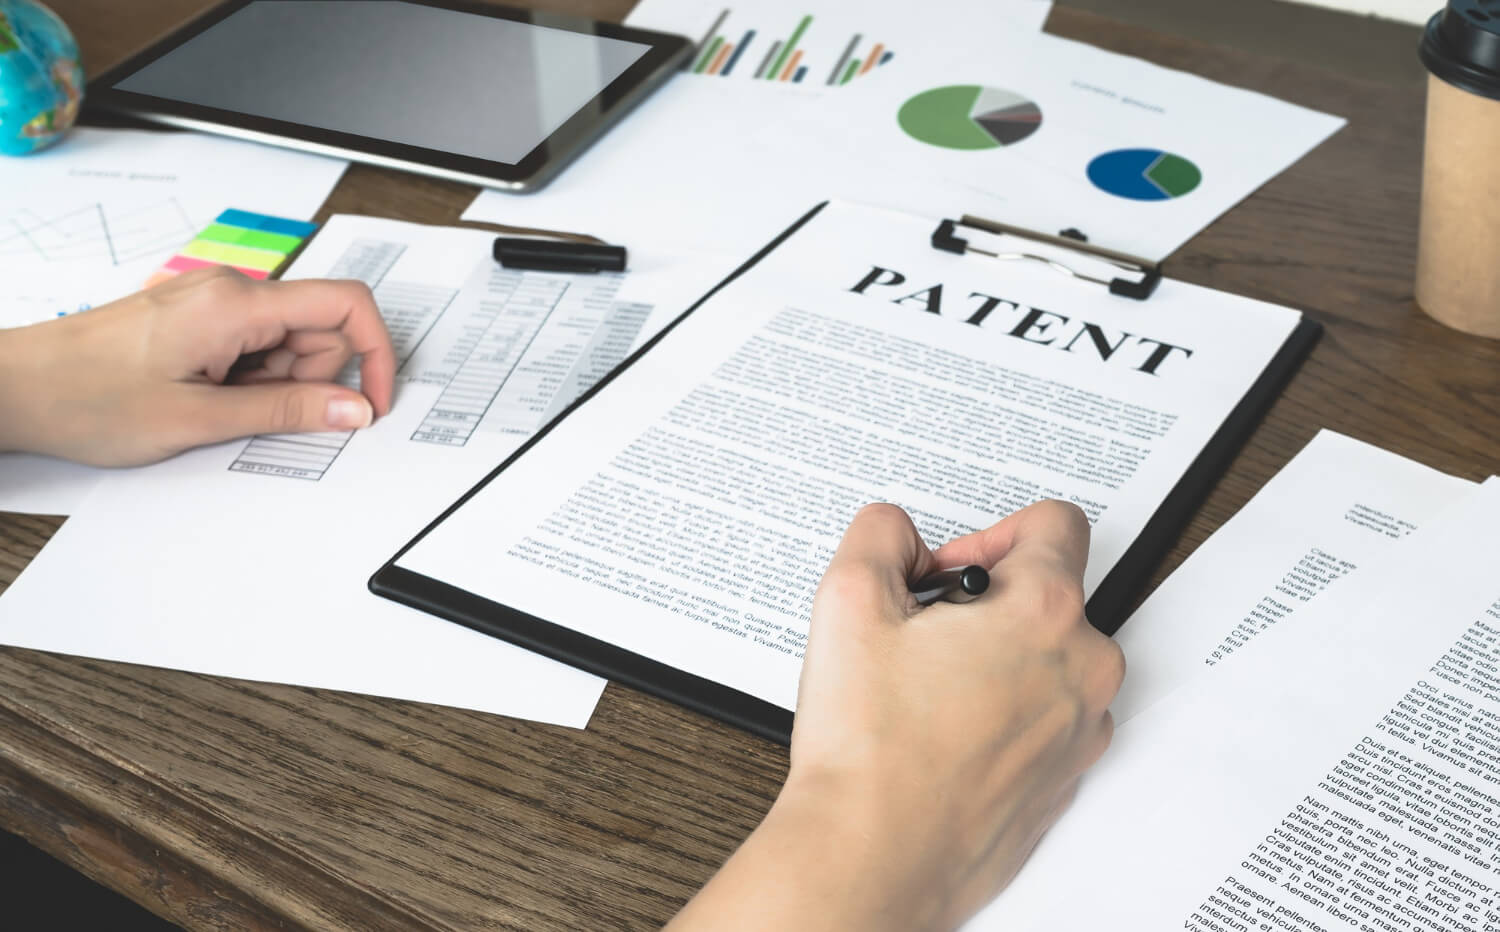 Aurora Cannabis and Willow Biosciences have settled their patent dispute